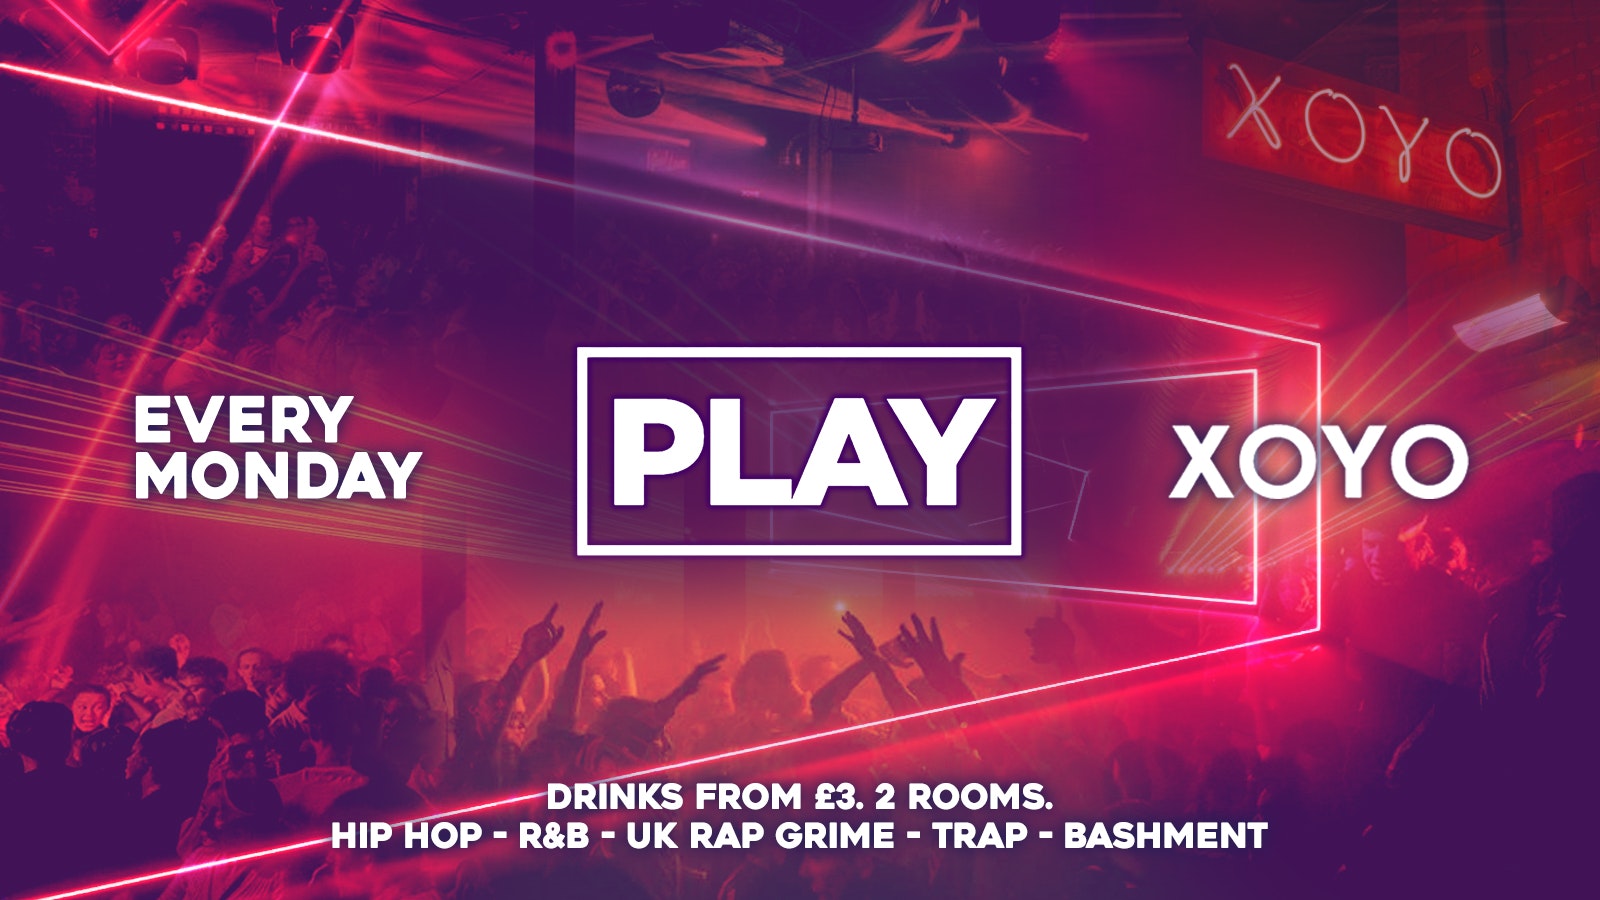 Play @ XOYO – The Biggest Weekly Monday Student Night in London! – 8th August 2022 🔥